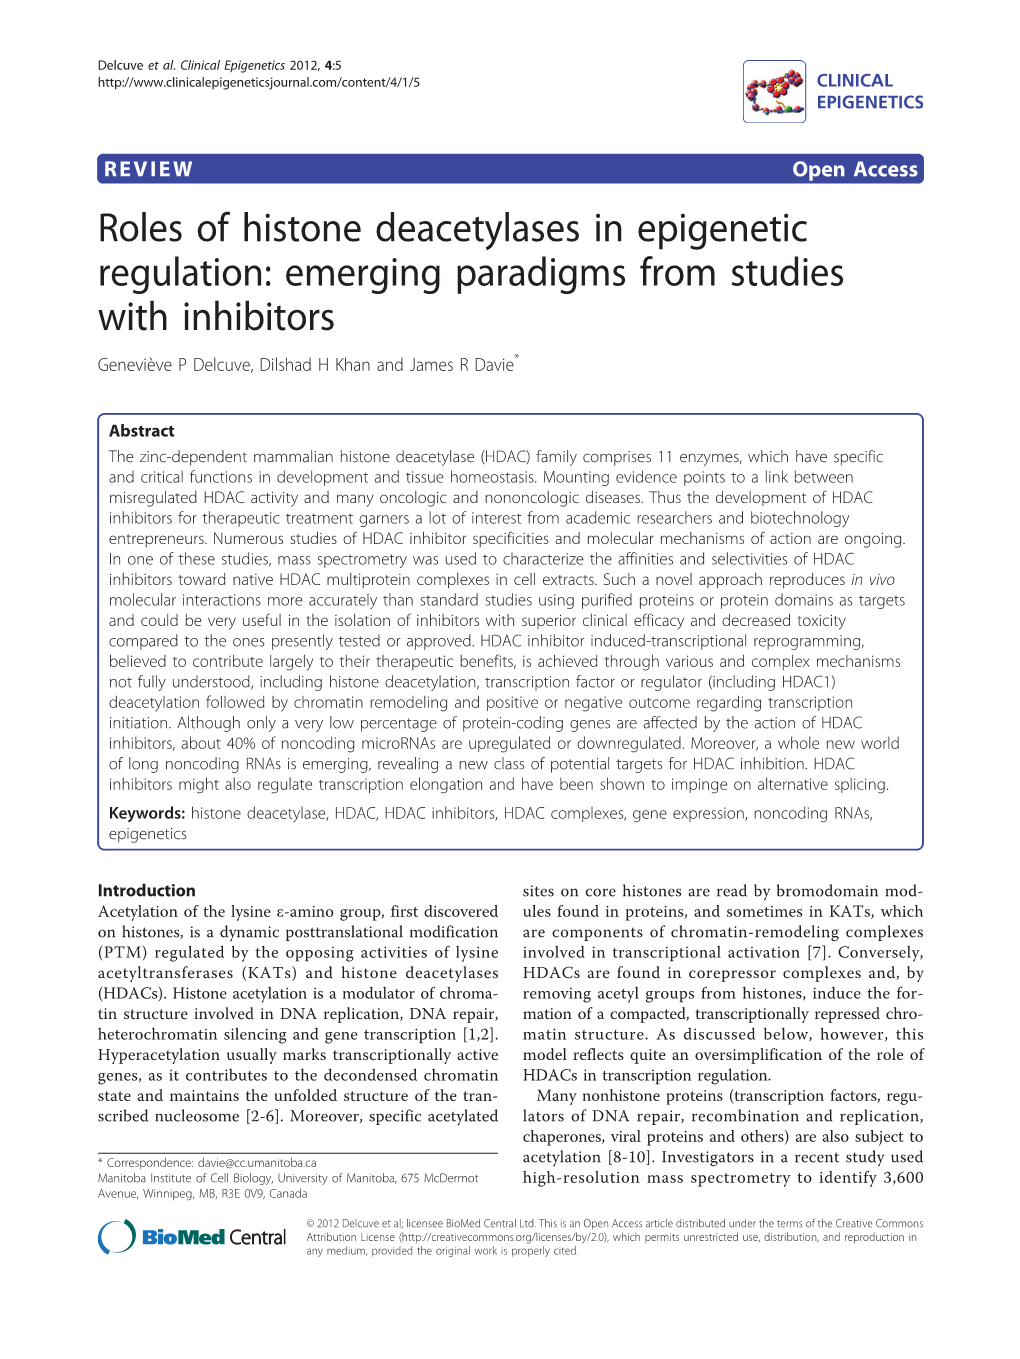 Roles of Histone Deacetylases in Epigenetic Regulation: Emerging Paradigms from Studies with Inhibitors Geneviève P Delcuve, Dilshad H Khan and James R Davie*